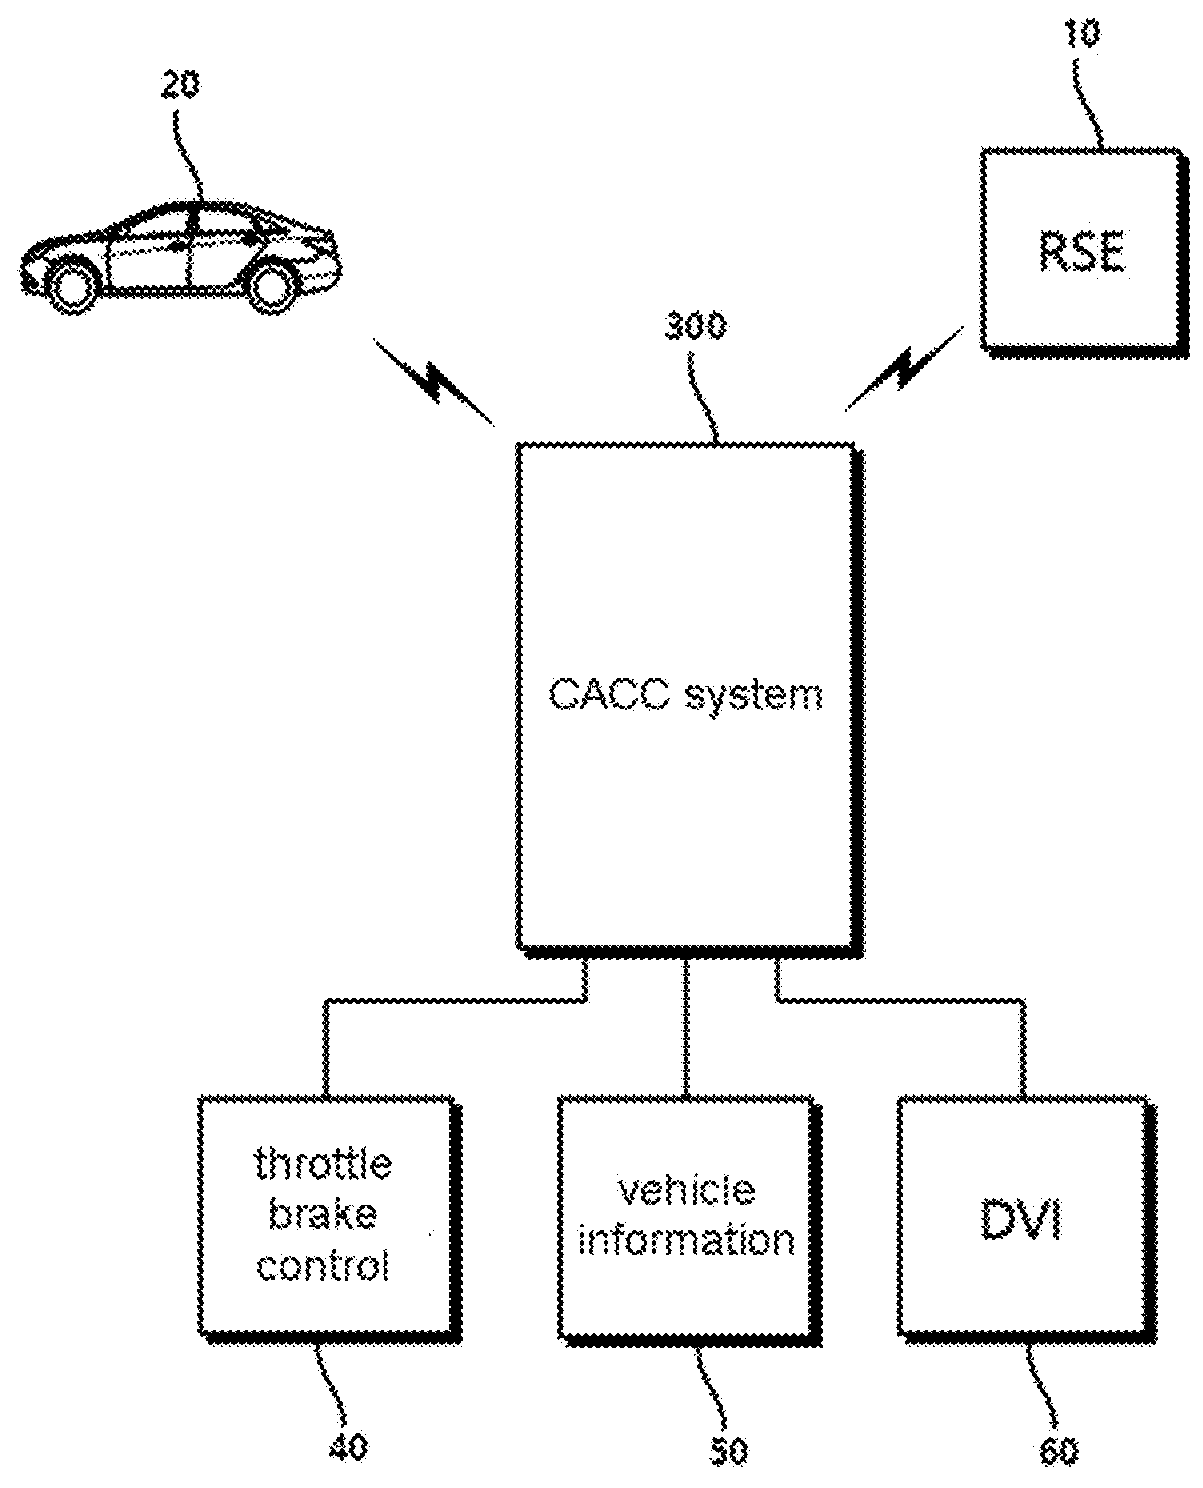 Cooperative adaptive cruise control system based on driving pattern of target vehicle